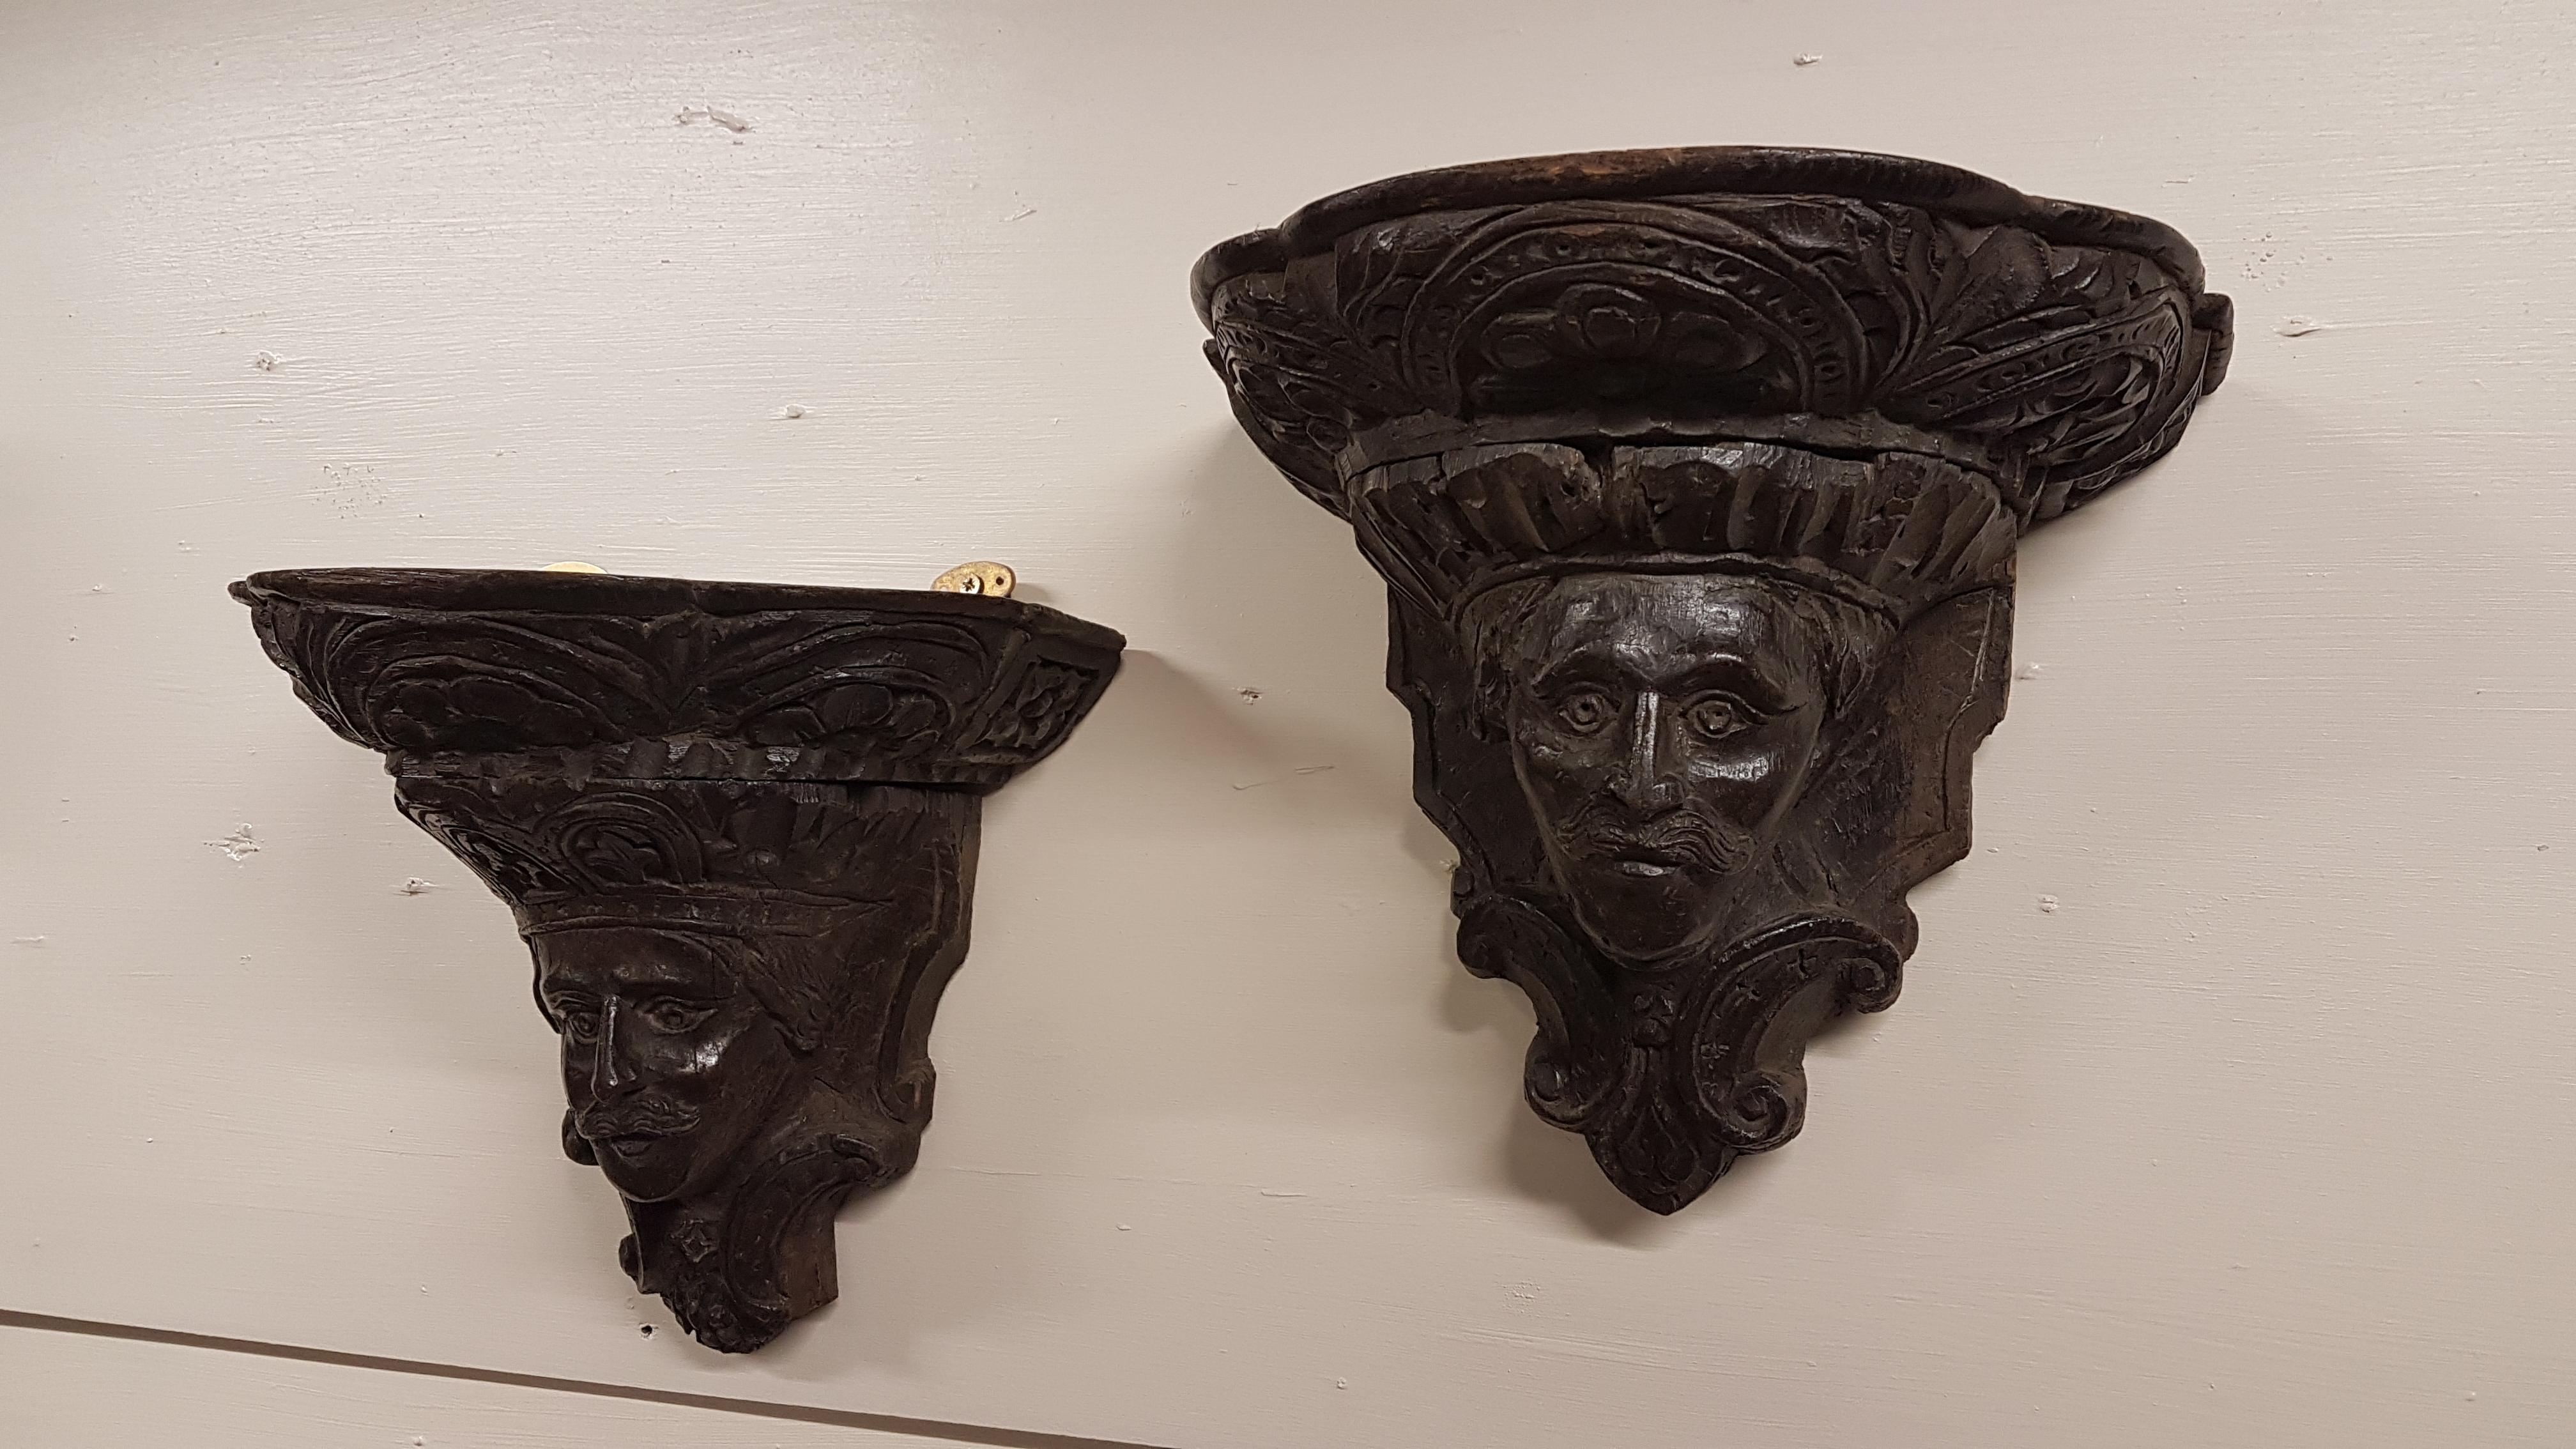 A superb pair of 17th century and later carved oak wall brackets with original wall mounting iron pegs in the top. They appear to depict Charles 1st on one and Archbishop William Laud. 
They are very well carved and have nice wear as you would